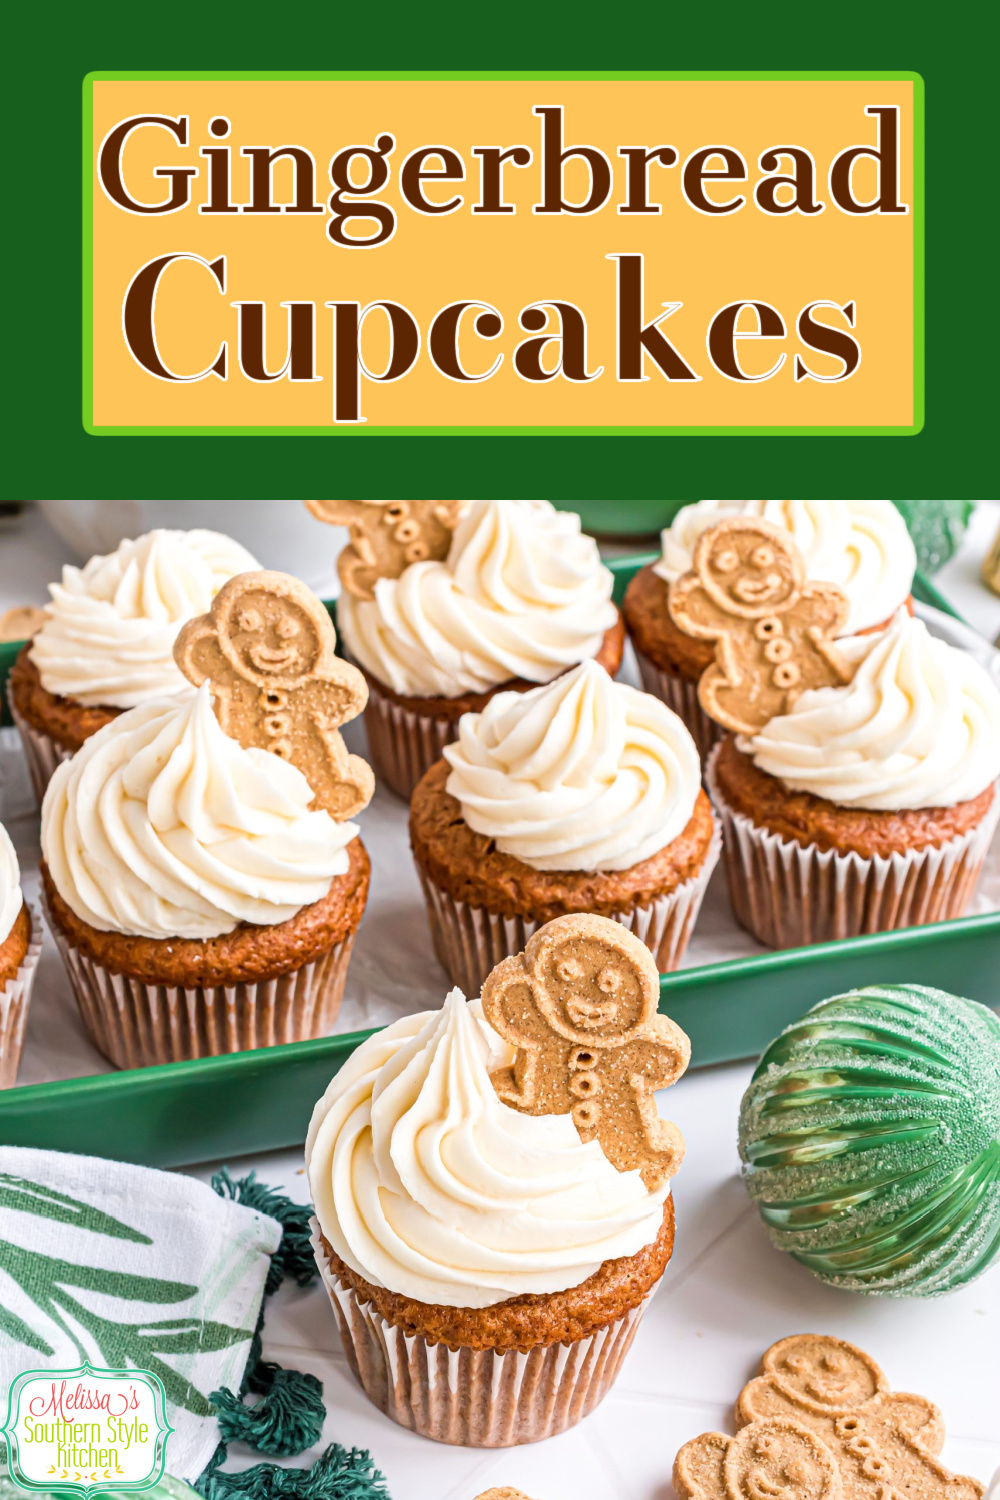 These Gingerbread Cupcakes topped with swirls of eggnog cream cheese frosting will make a fun and festive addition to your holiday desserts. #gingerbreadcupcakes #gingerbreadrecipes #easygingerbreadrecipe #cupcakerecipes #cakemixhacks #creamcheesefrosting #eggnog via @melissasssk